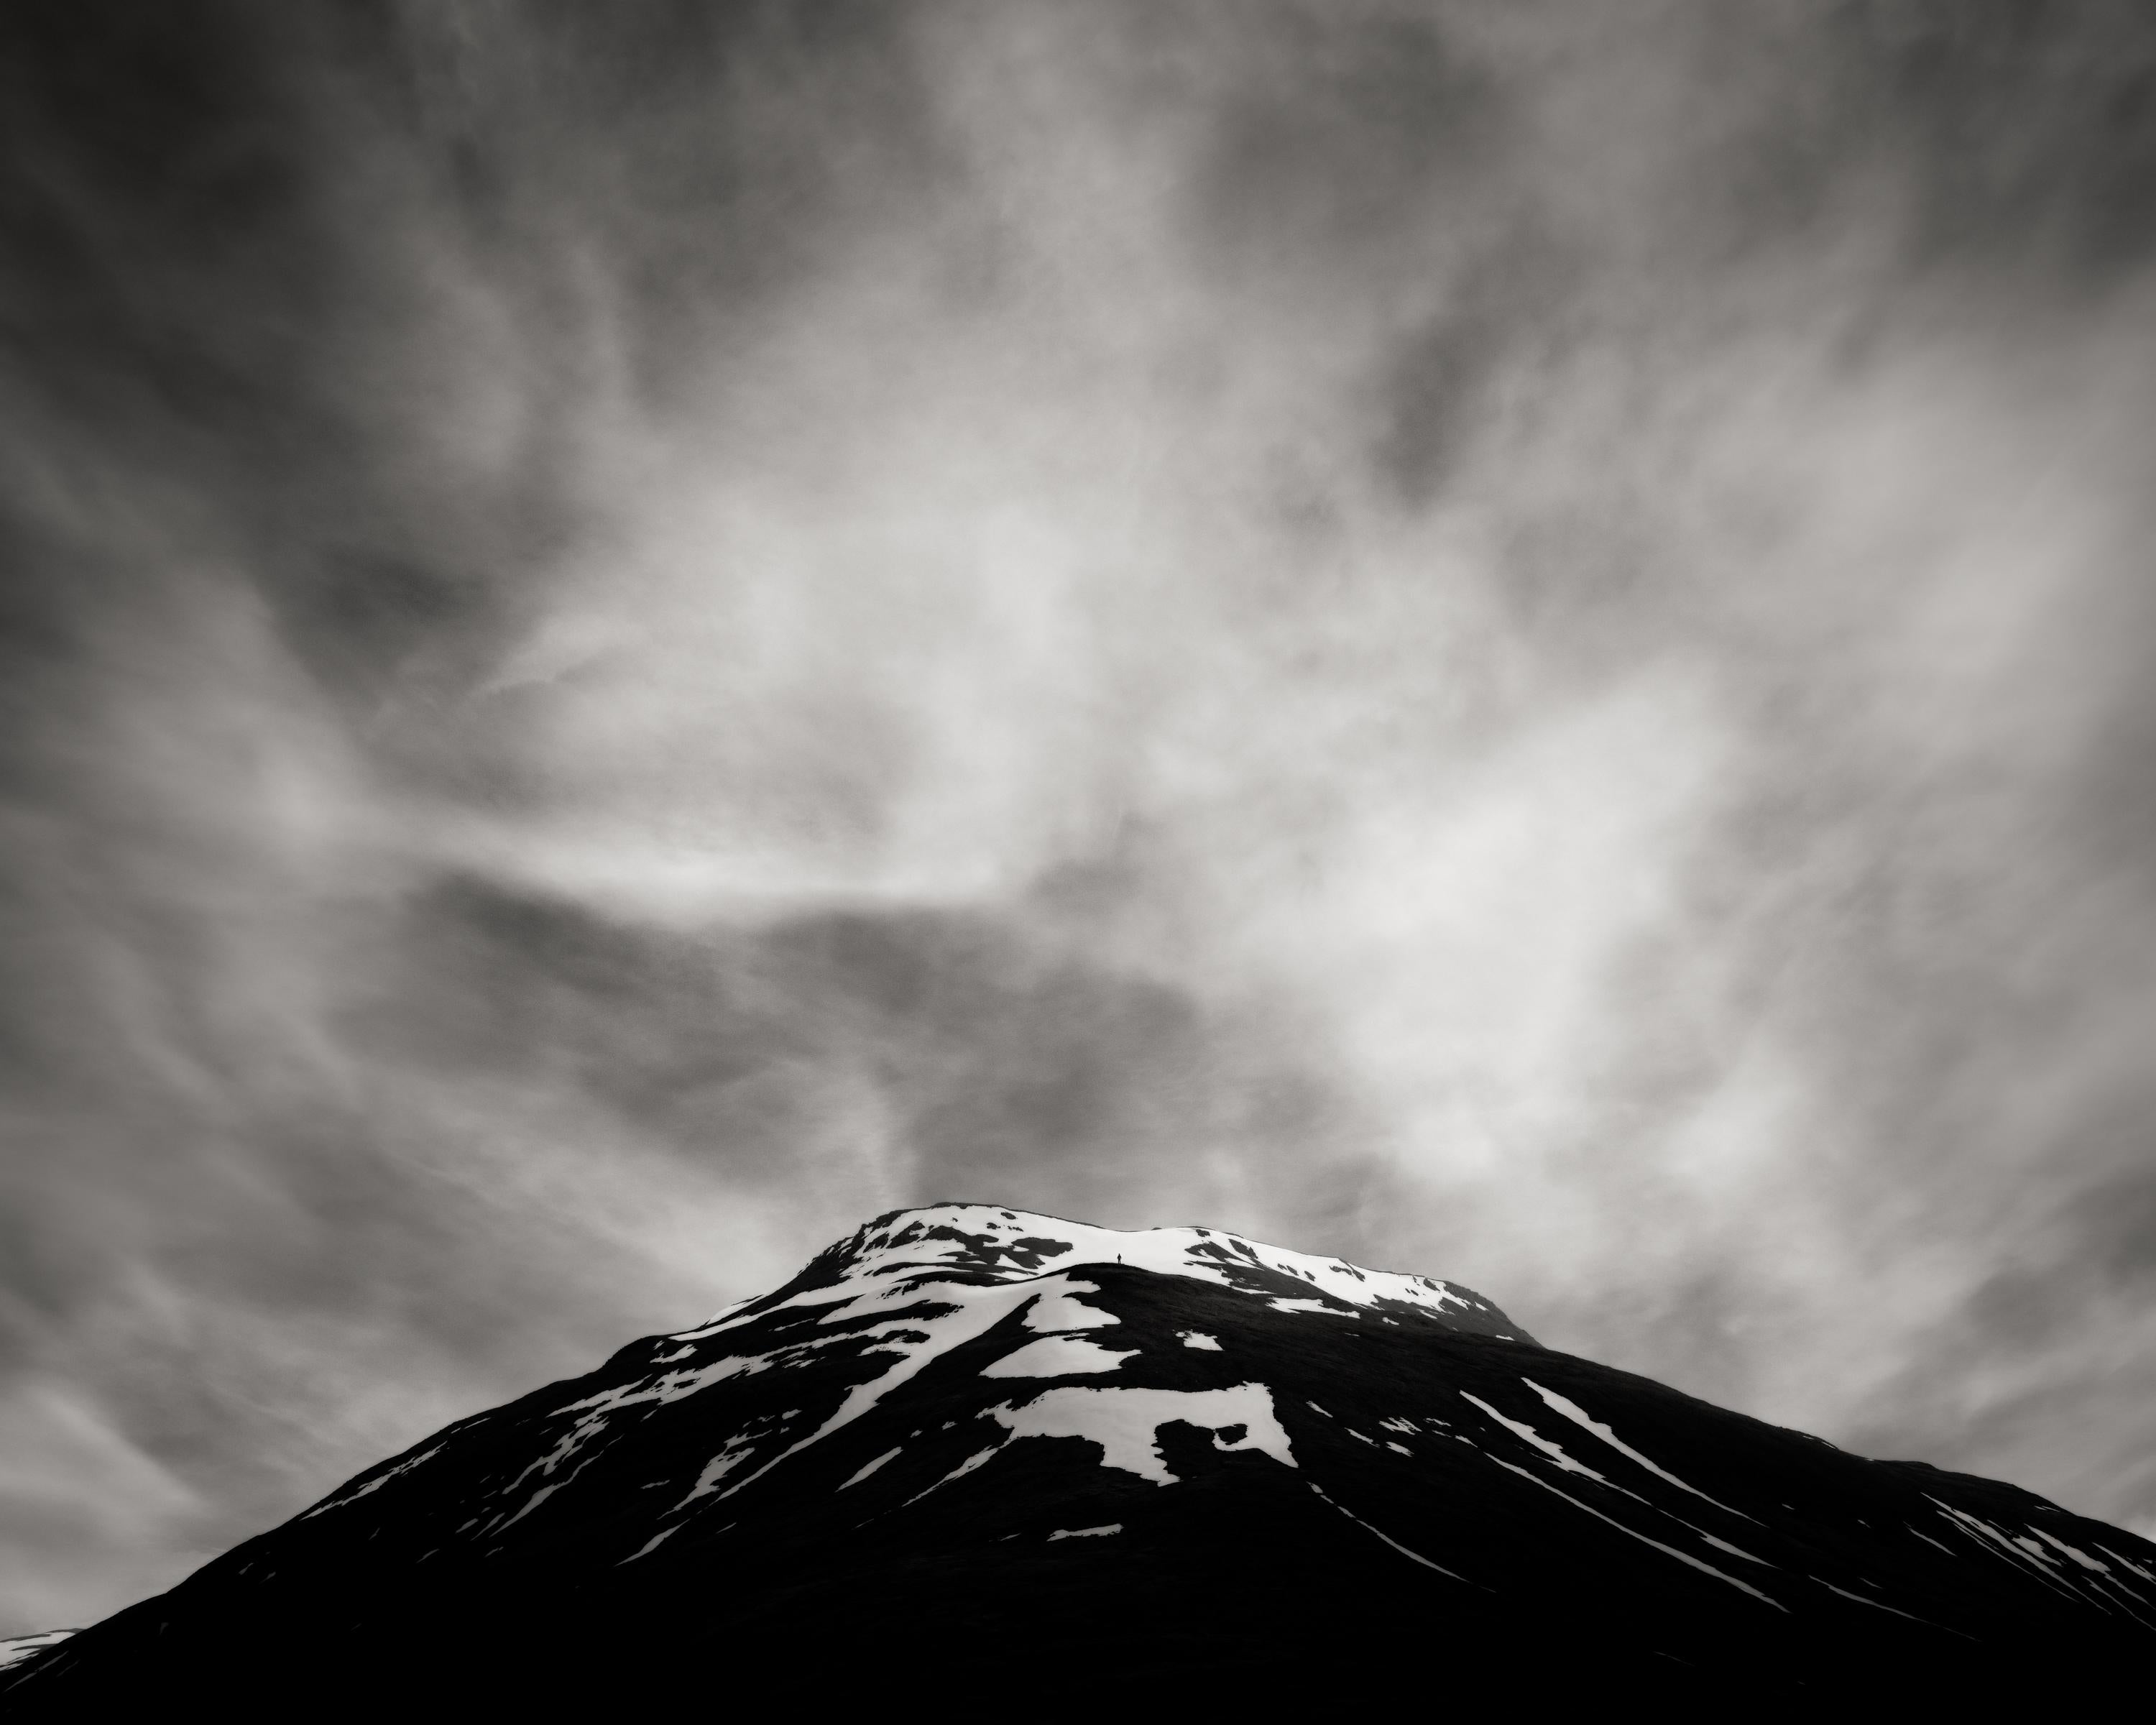 Jeffrey Conley Black and White Photograph - Figure and Mountain, Iceland, 2017